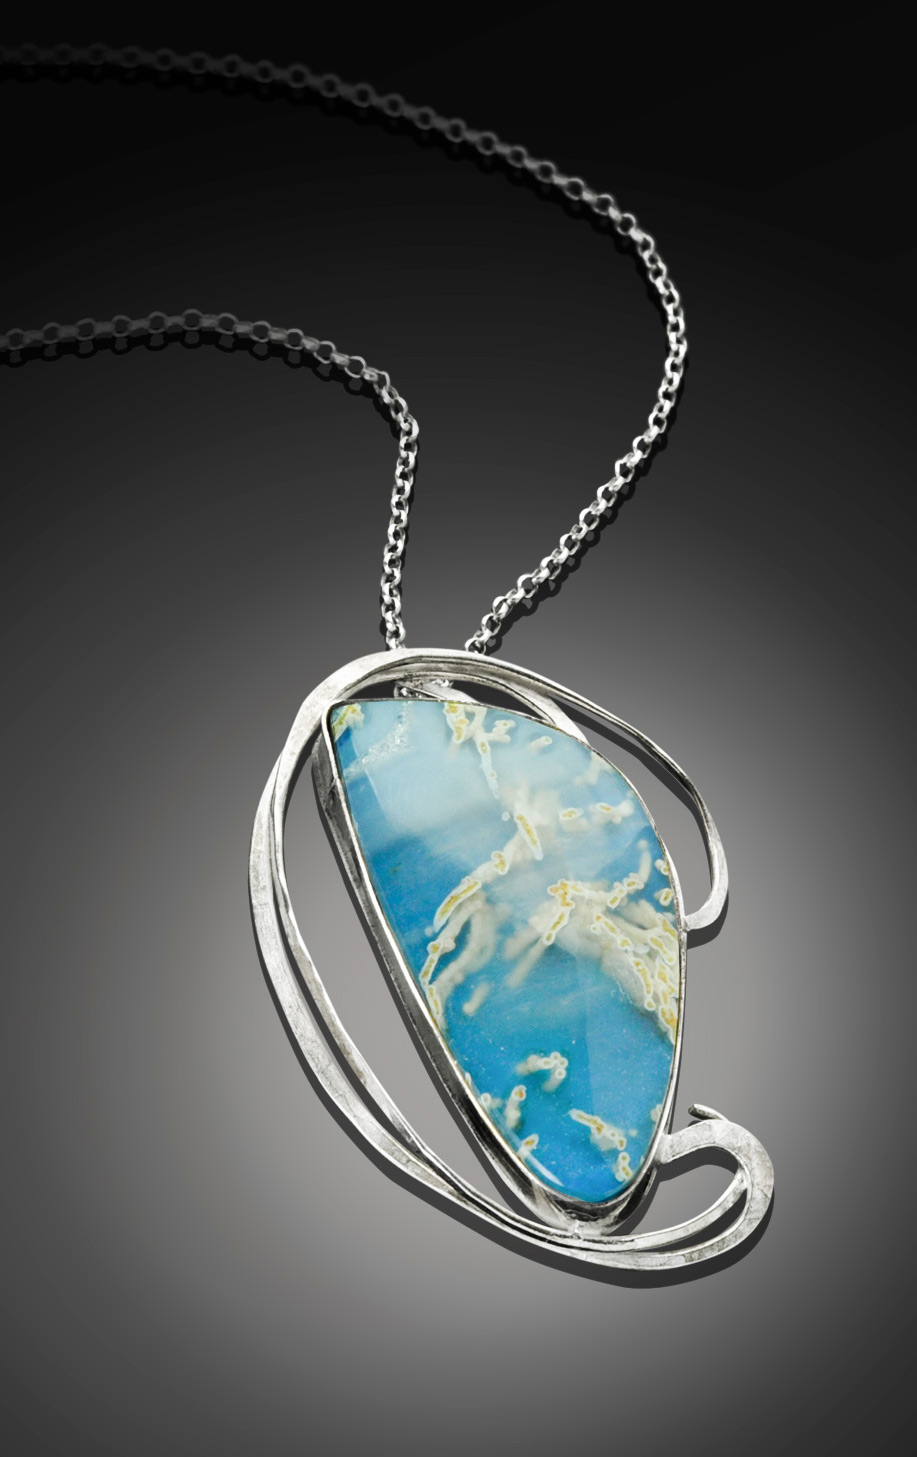 By the Seashore Blue Agate and Hand Forged Silver Pendant by Kaelin Design Art Jewelry